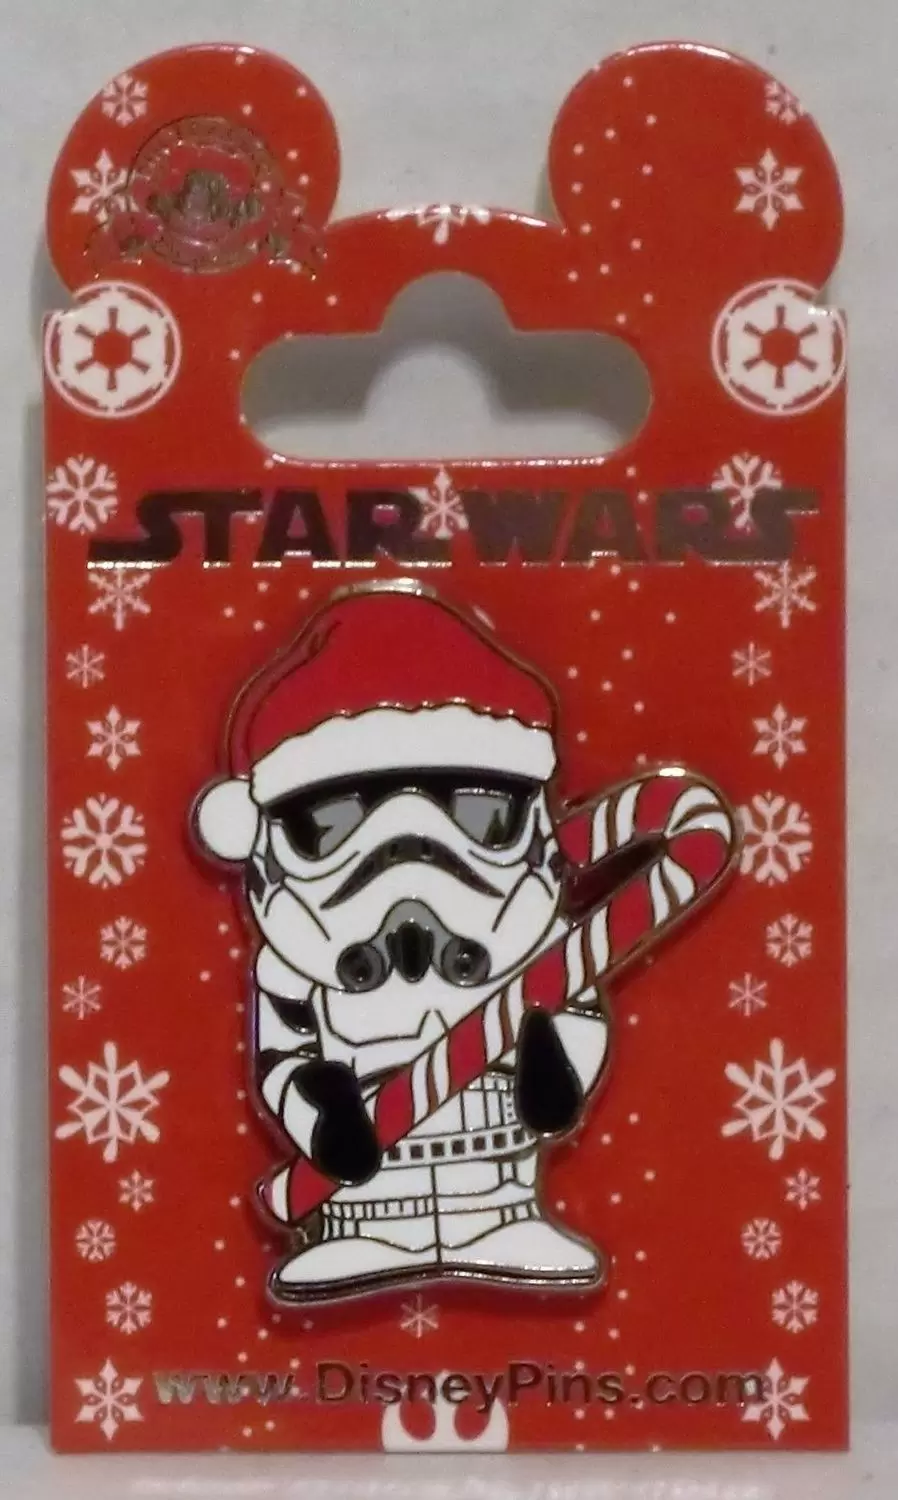 Disney Pins Open Edition - Stormtrooper Candy Cane